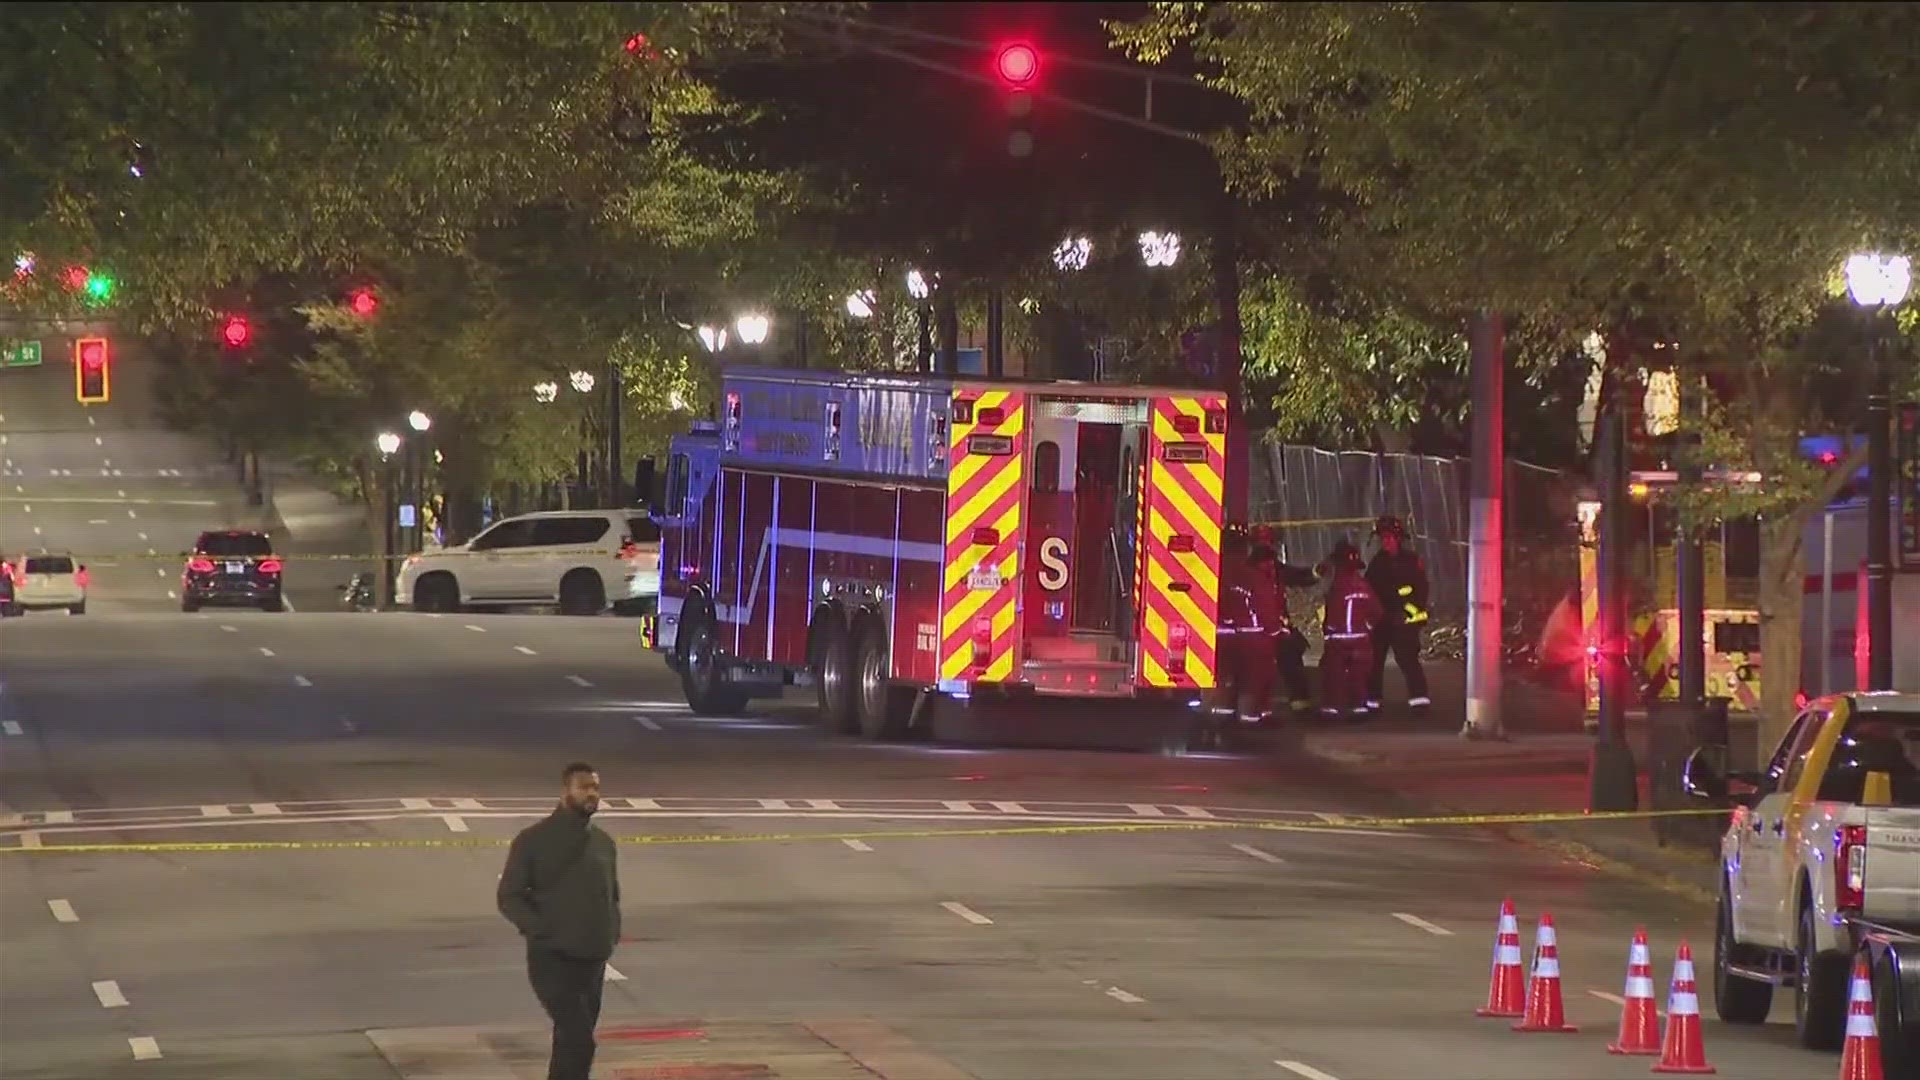 According to a MARTA spokesperson, it happened around 10:20 p.m. as a bus entered the Arts Center Station loop.